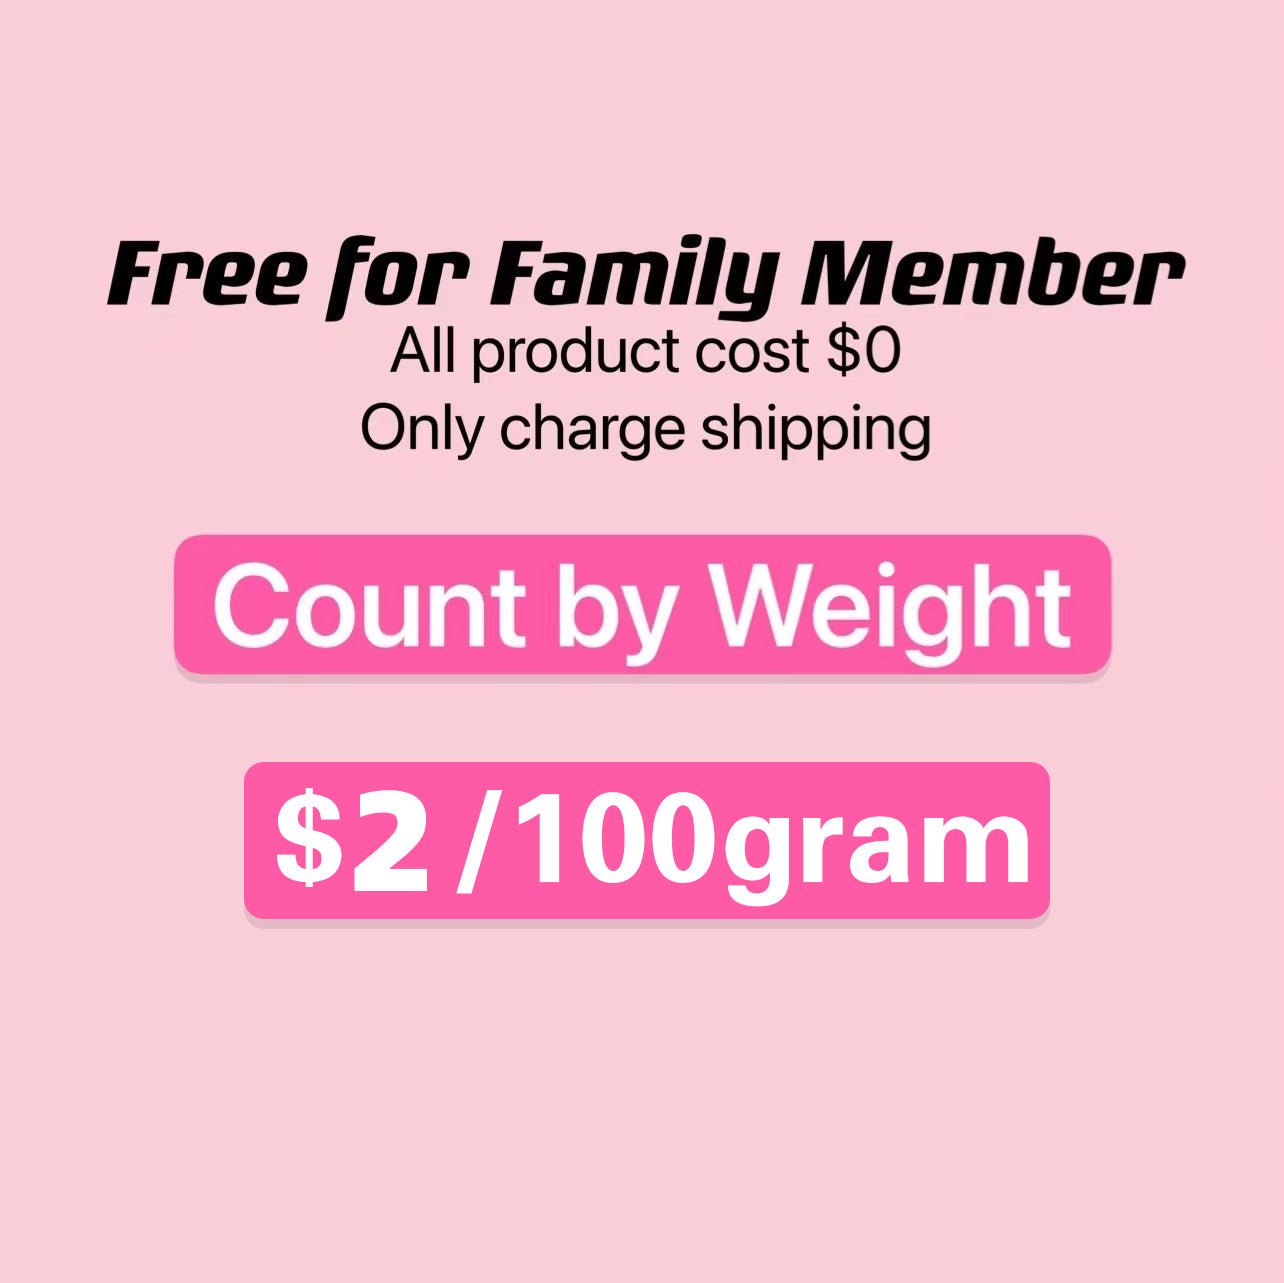 【$2/100gram】Count by weight, only charge shipping